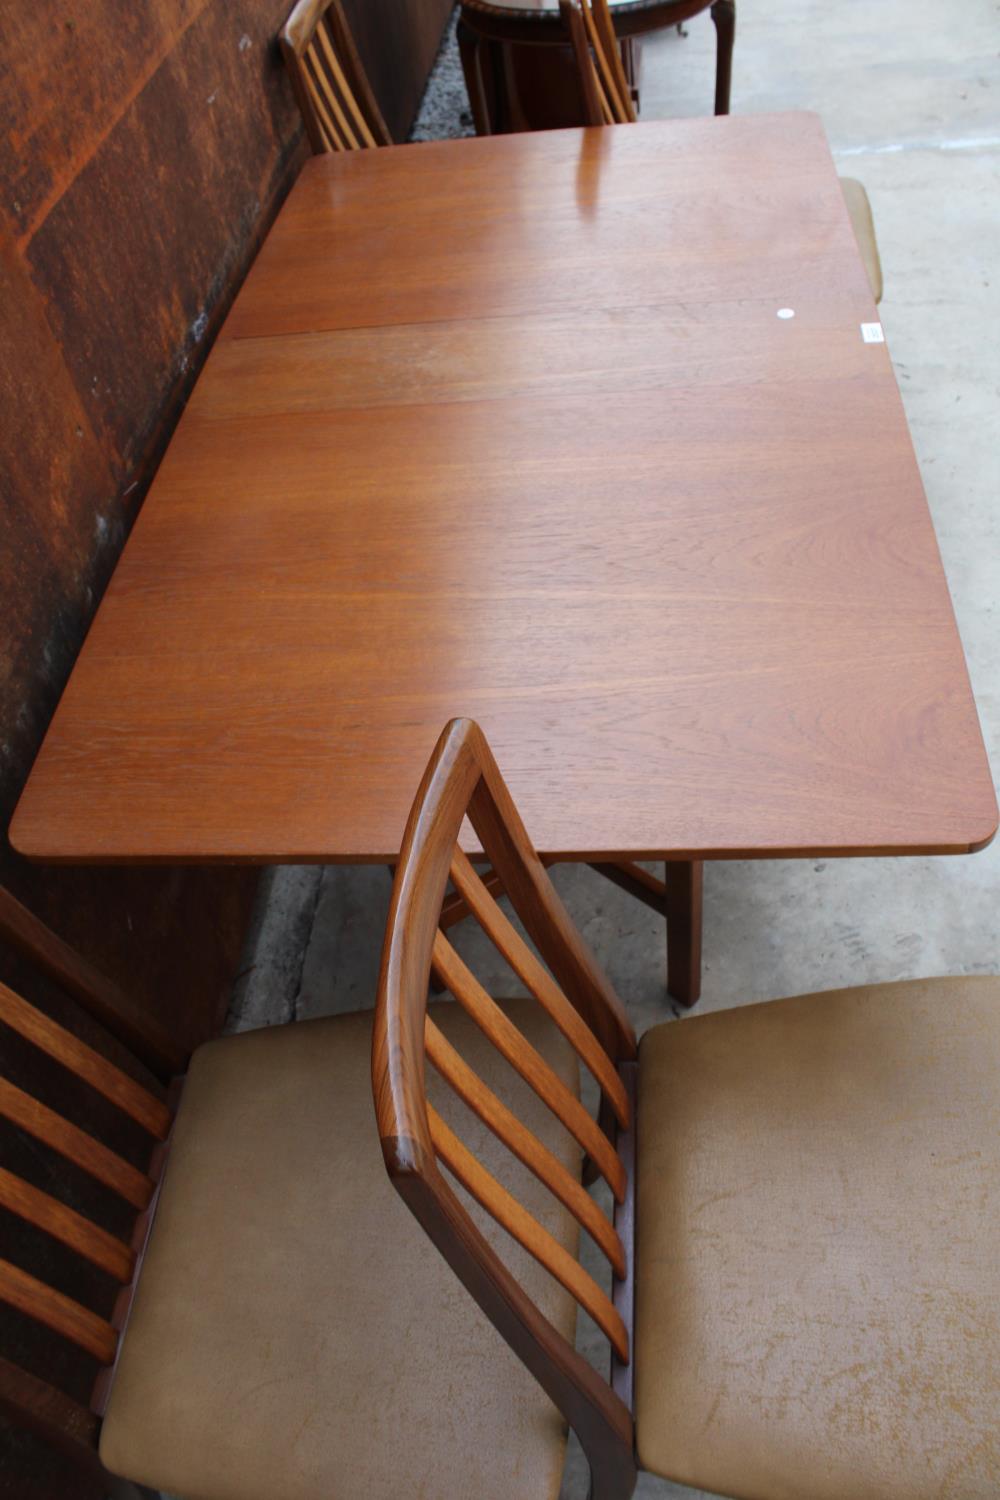 A RETRO TEAK DROP-LEAF DINING TABLE, 57" X 33" OPENED AND FOUR DINING CHAIRS - Image 4 of 4